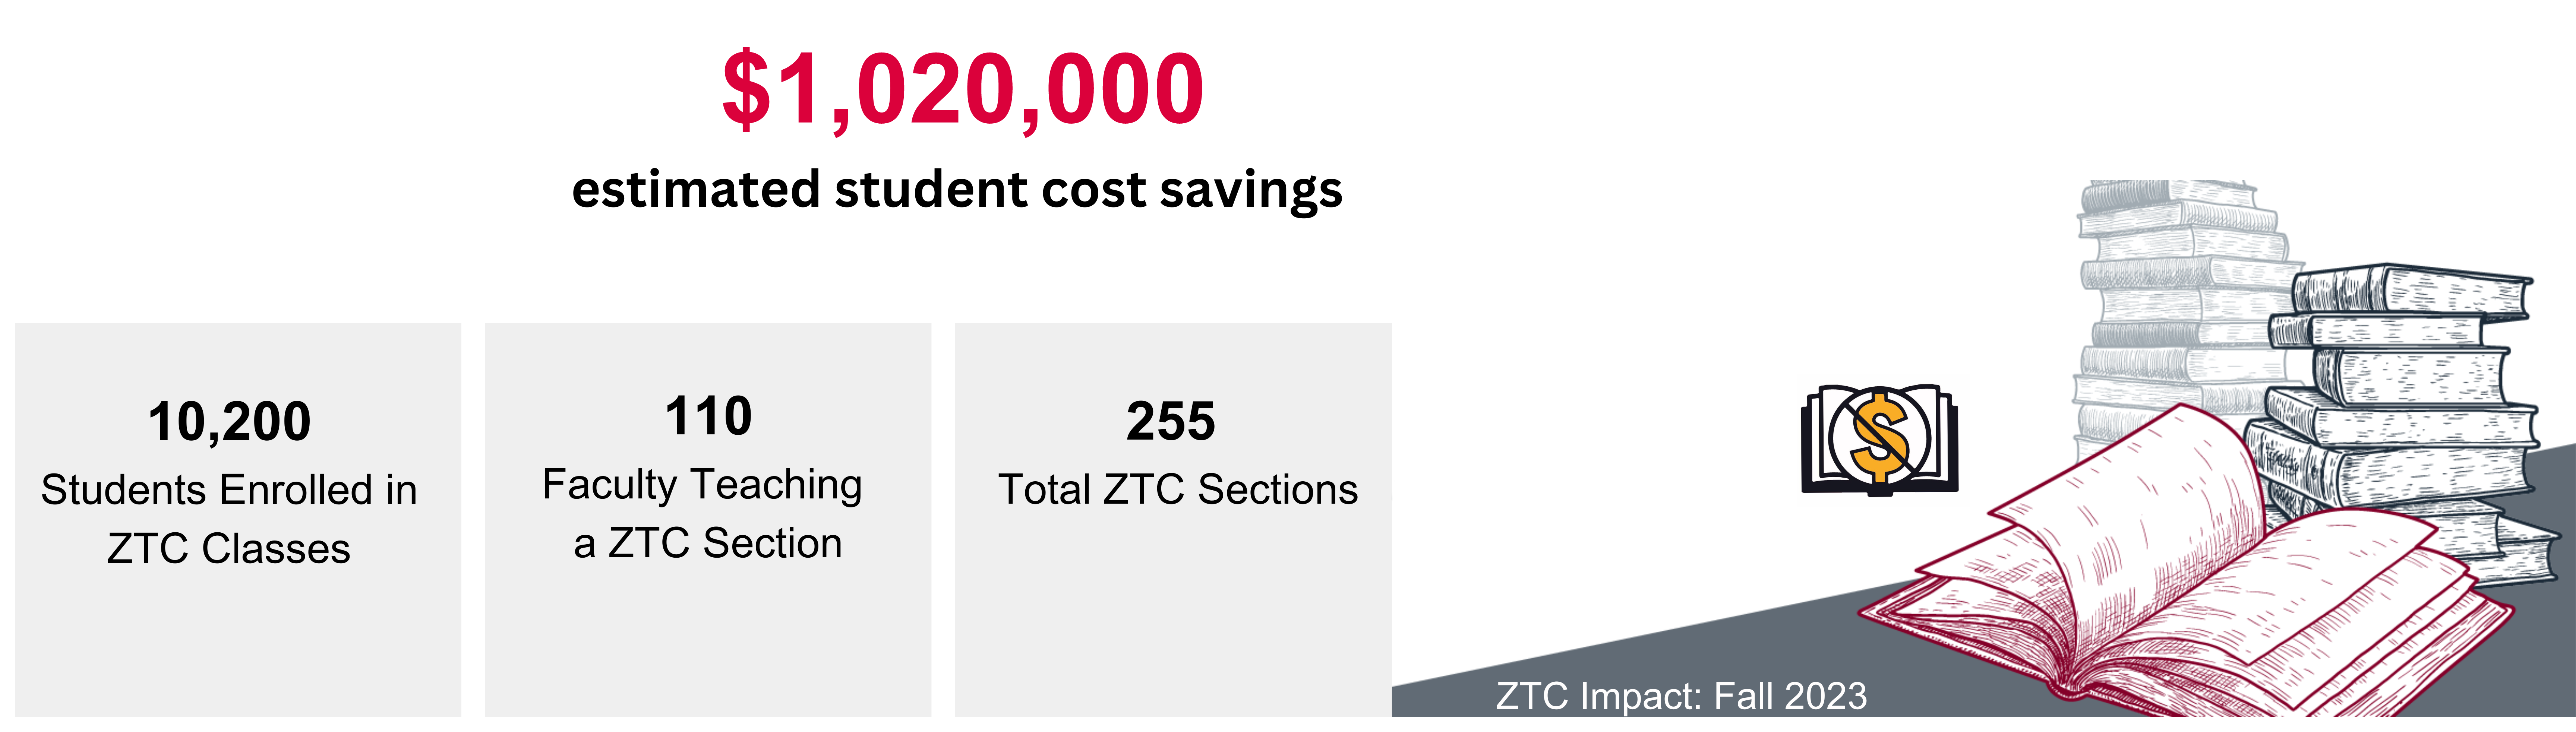 ZTC Impact for Fall 2023: $1,020,000 estimated student cost savings, 10,200 students enrolled in ZTC Classes, 110 faculty teaching a ZTC section, 255 total ZTC sections